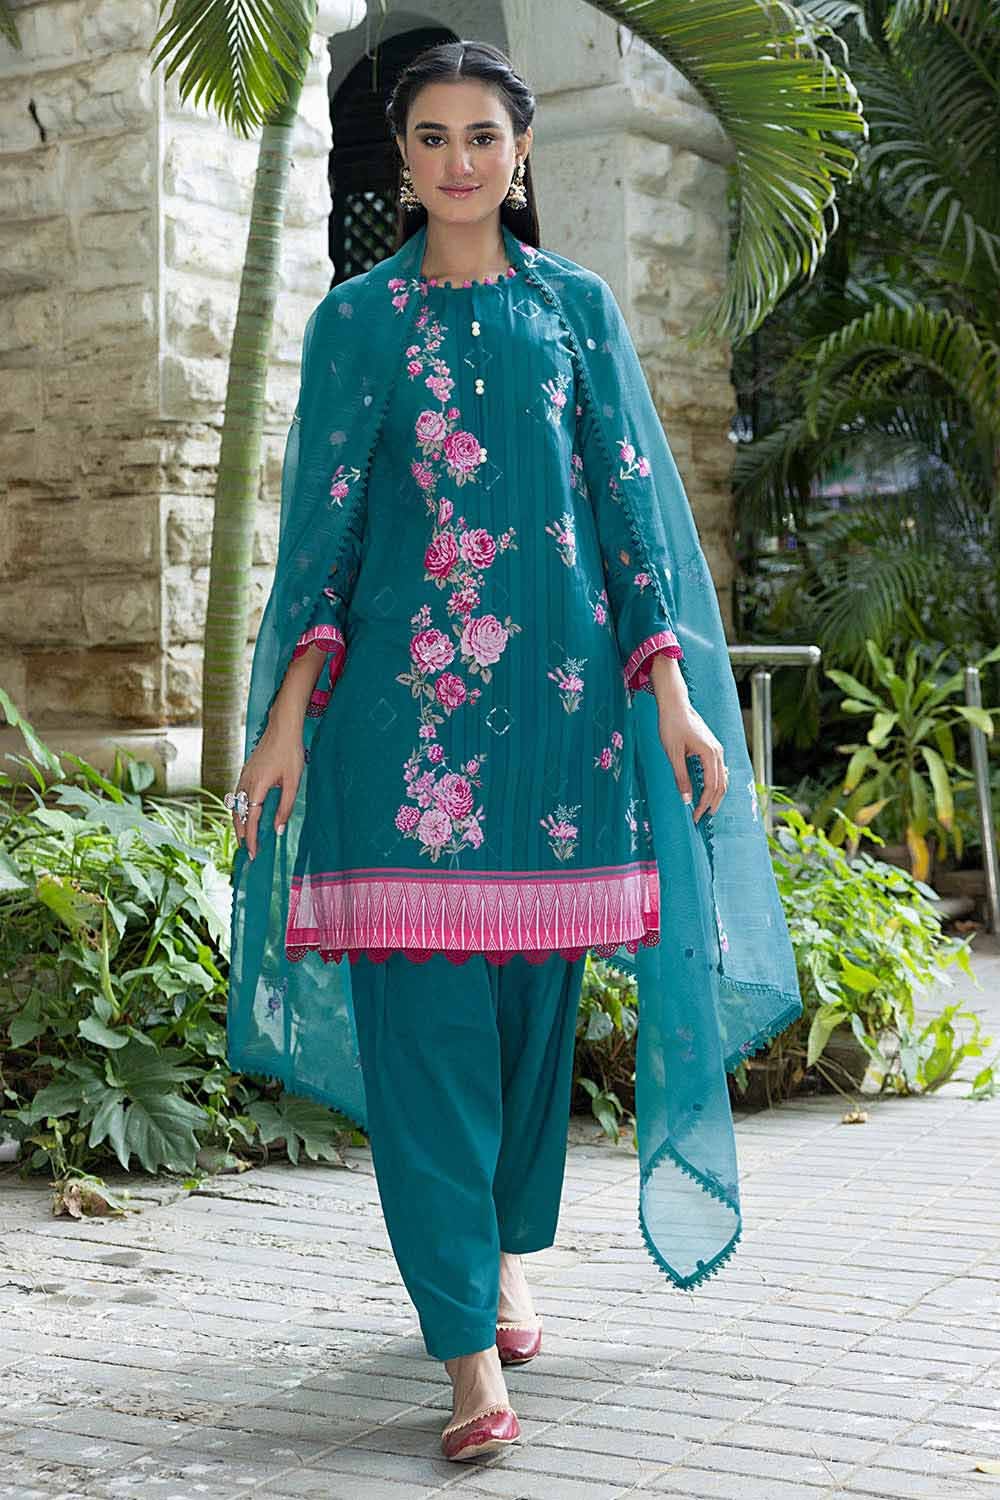 Punjabi Suit For Daily Wear/Cotton Printed Suit Designs Id… | Flickr